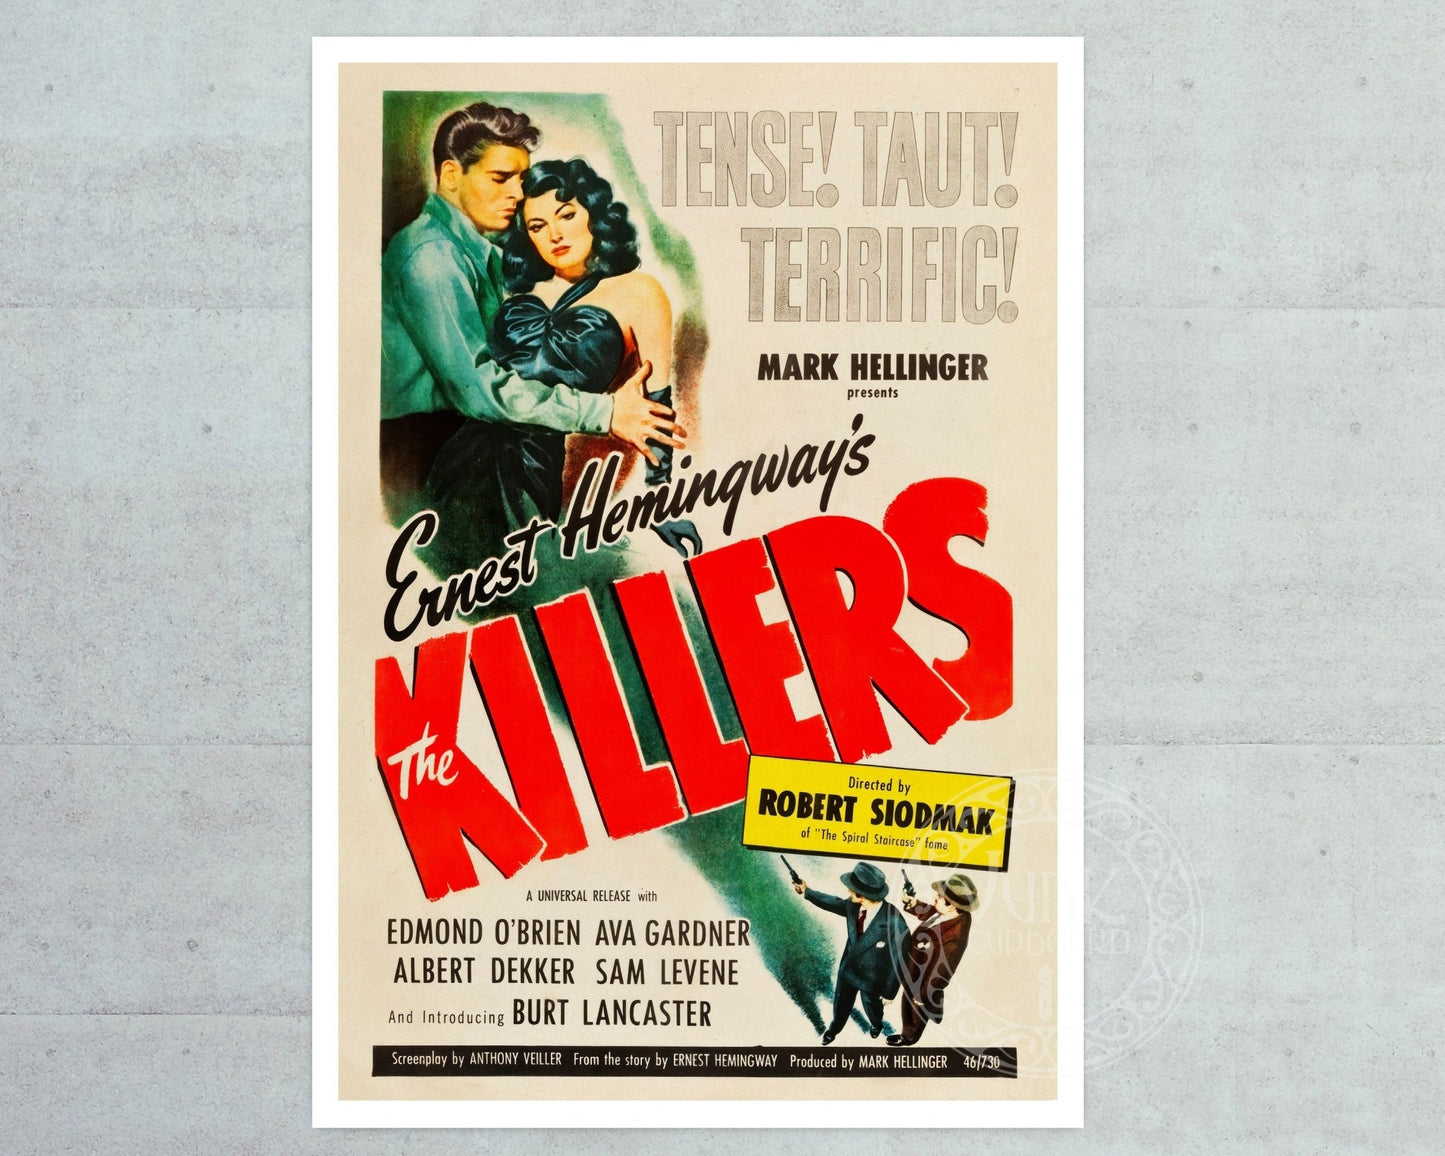 Vintage Movie Poster "The Killers" (1946) - Mabon Gallery